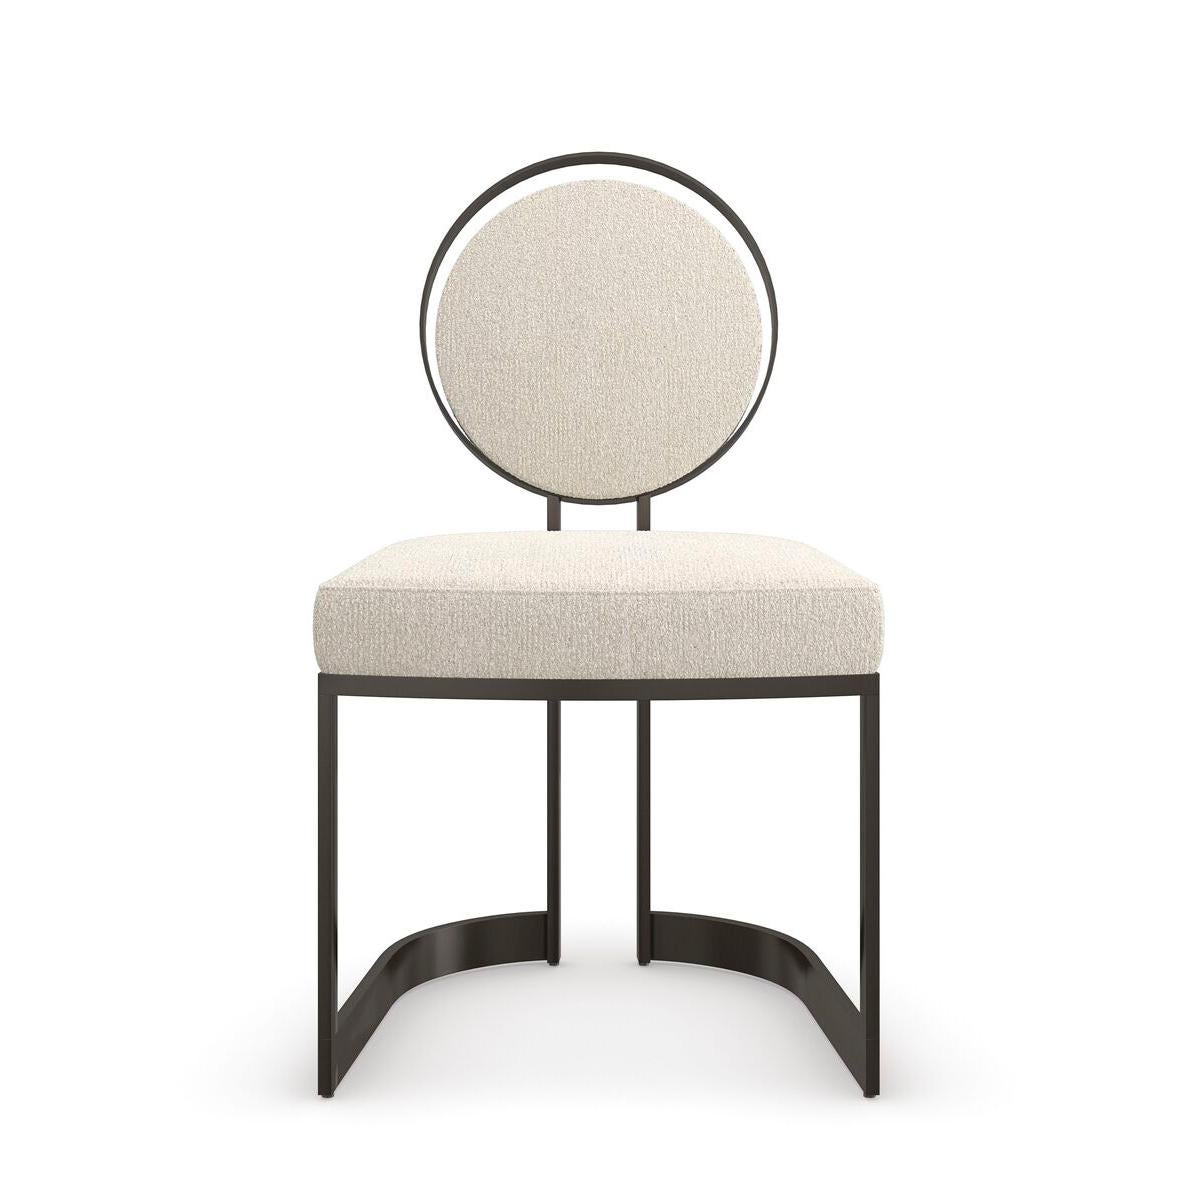 This sculptural metal chair lends an artful element to dining interiors, with a seemingly floating upholstered back set inside a metal circle. A sliver of space around the edges evokes phases of the moon and mimics its crescent-shaped frame. A